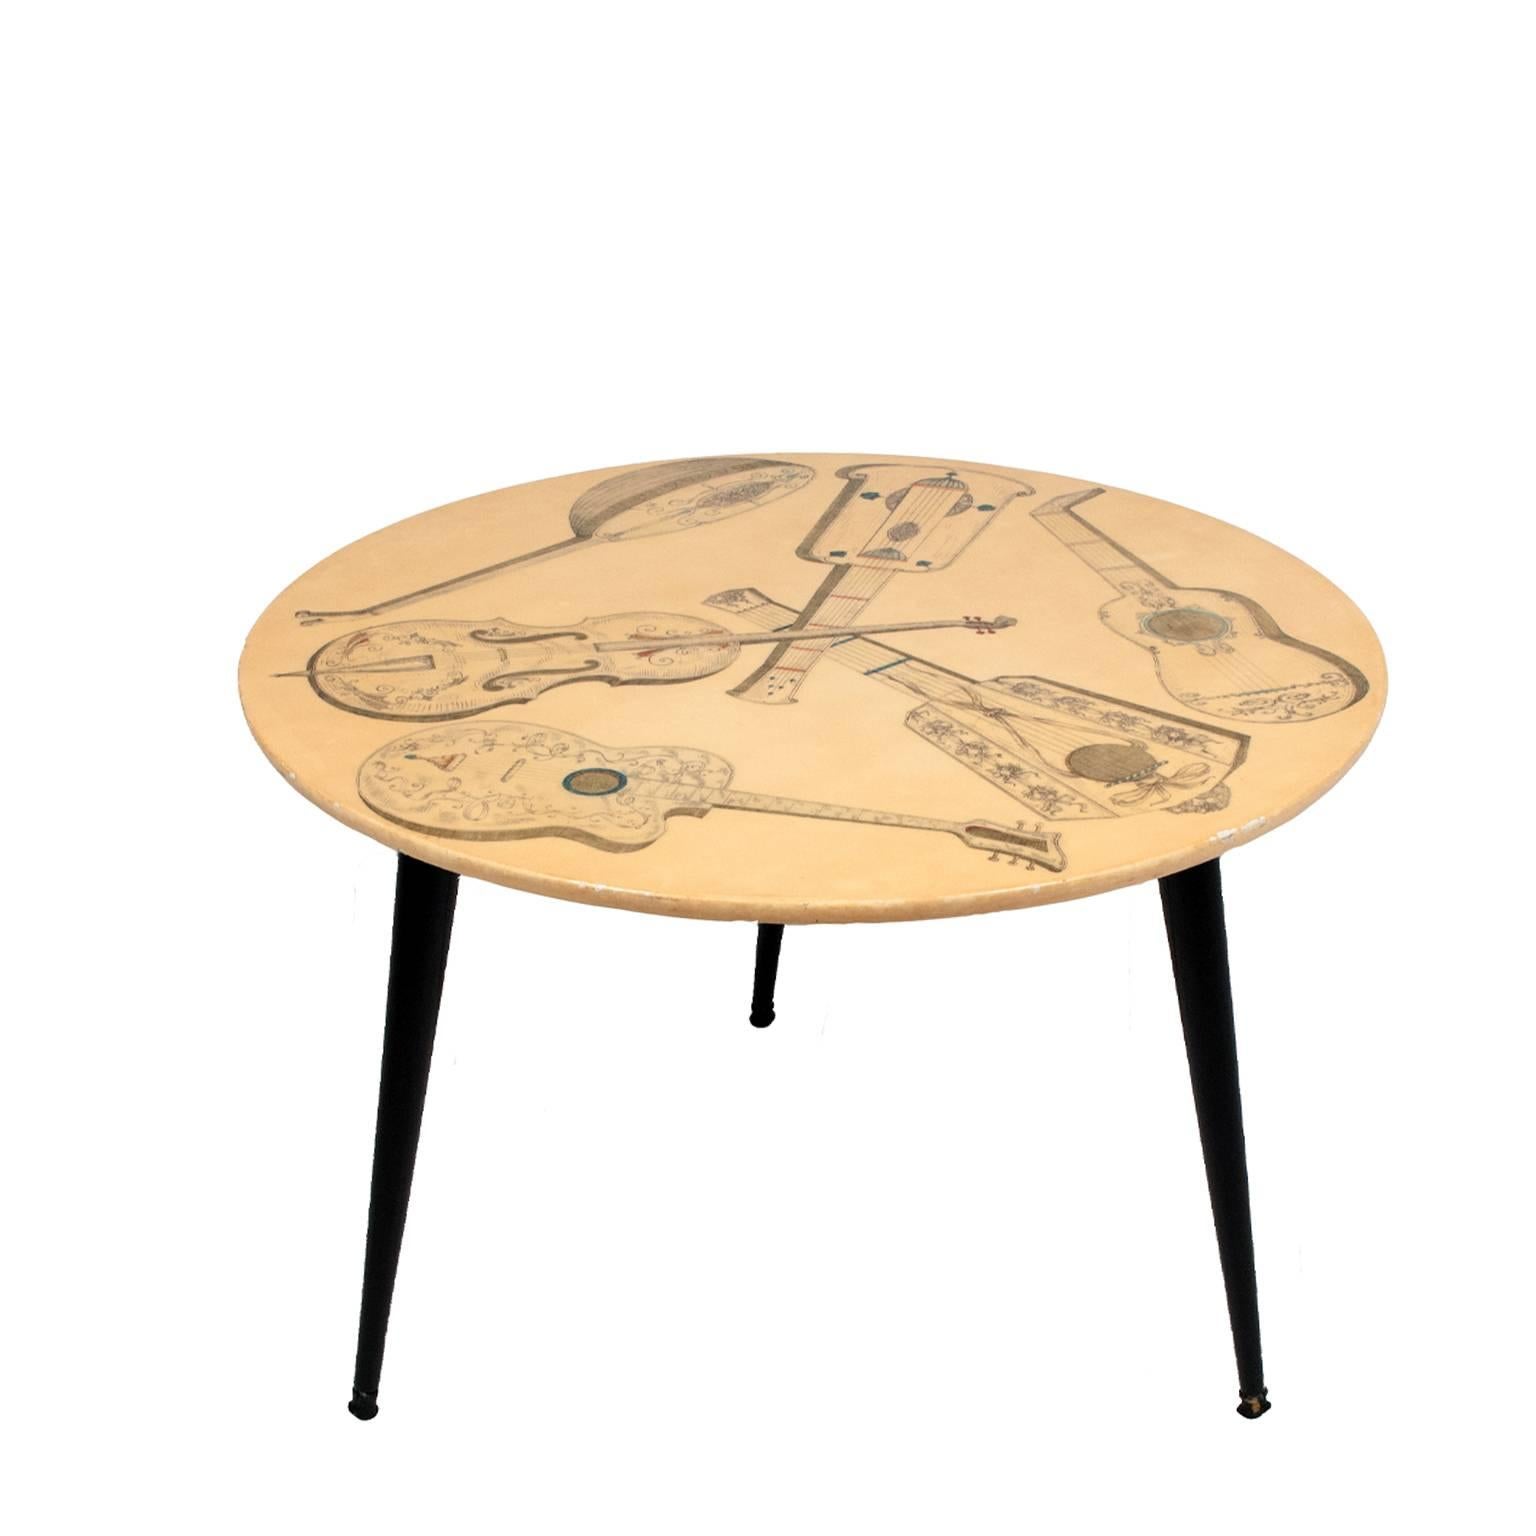 Round top table printed in Fornasetti's signature trompe l'oeil motif; lithographically transfer printed, this table features Strumenti Musicale to the top. Three black lacquered solid wood legs. Label to bottom stamped with number and Italy.